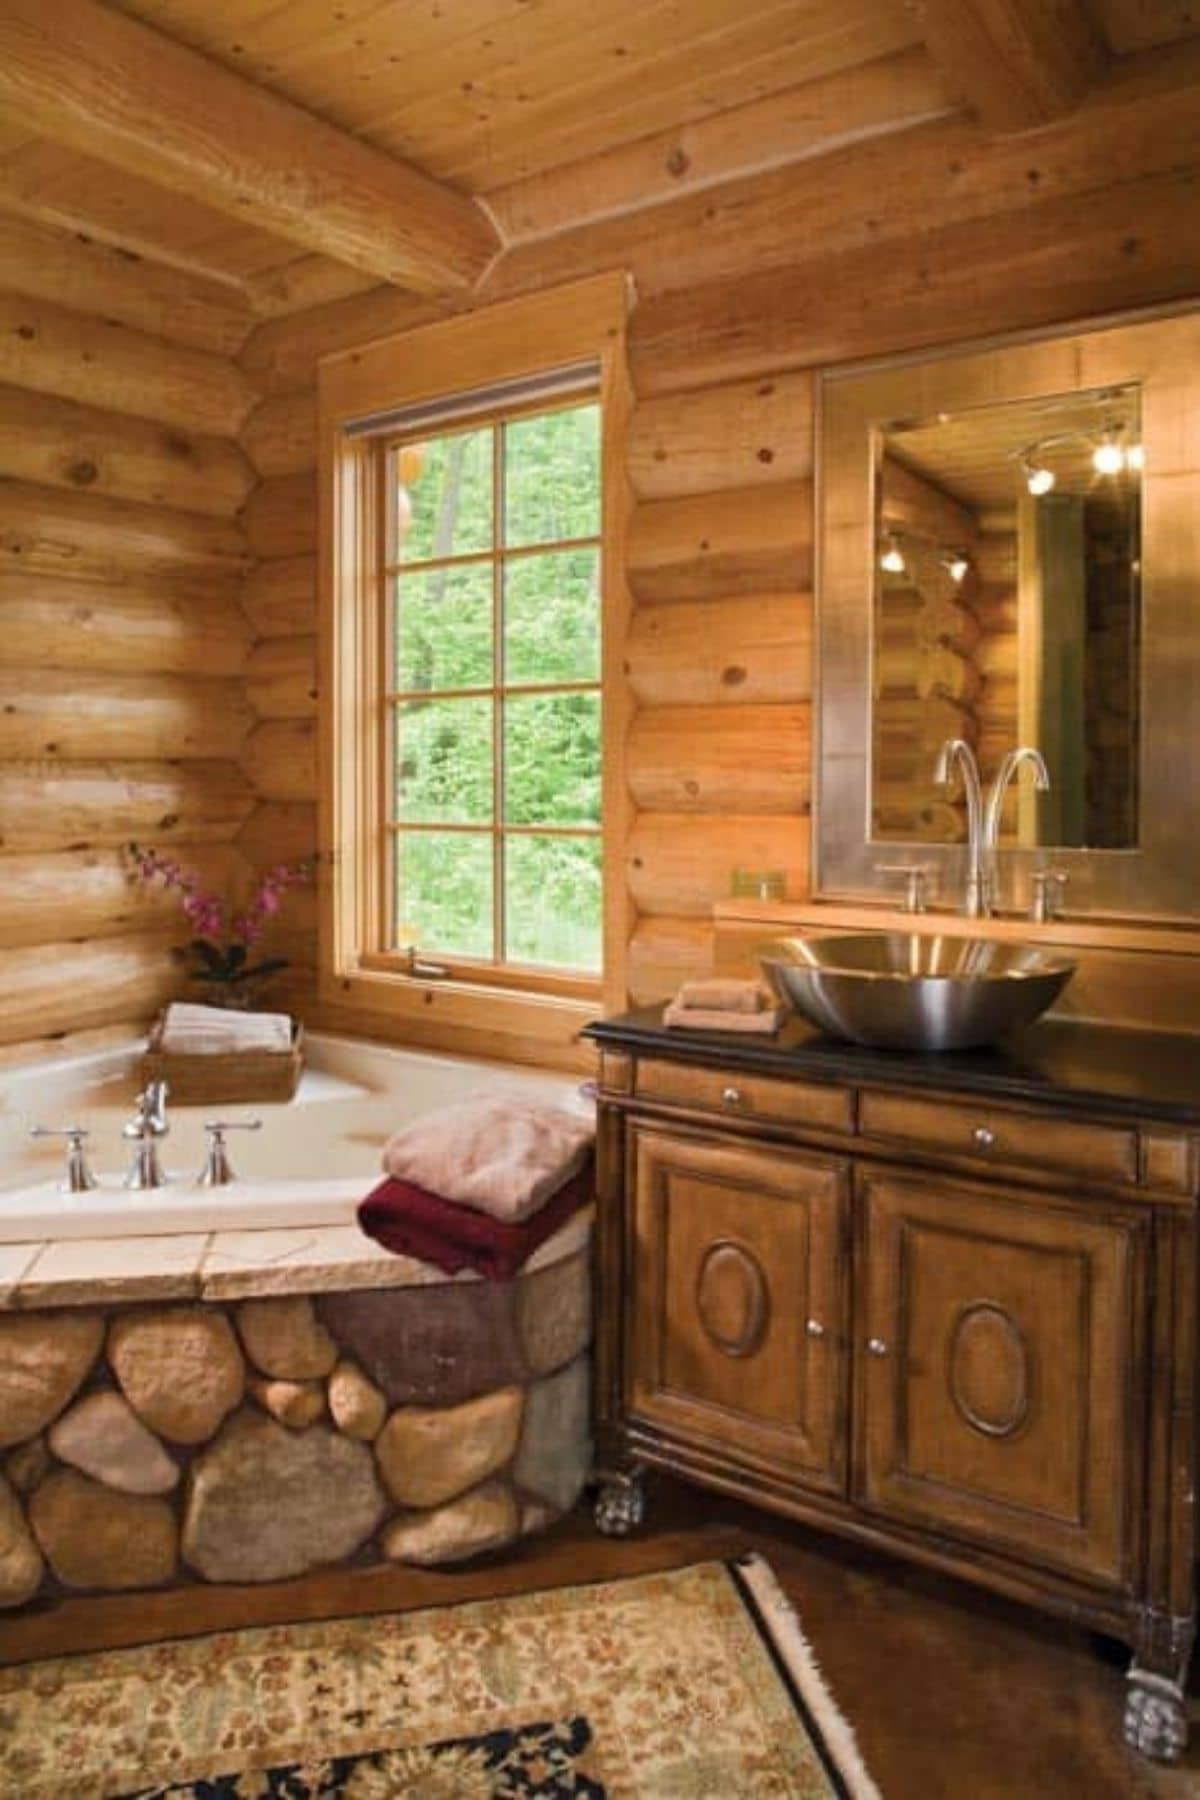 bathroom with soaking tub in corner surrounded by stones net to wood vanity with silver bowl sink